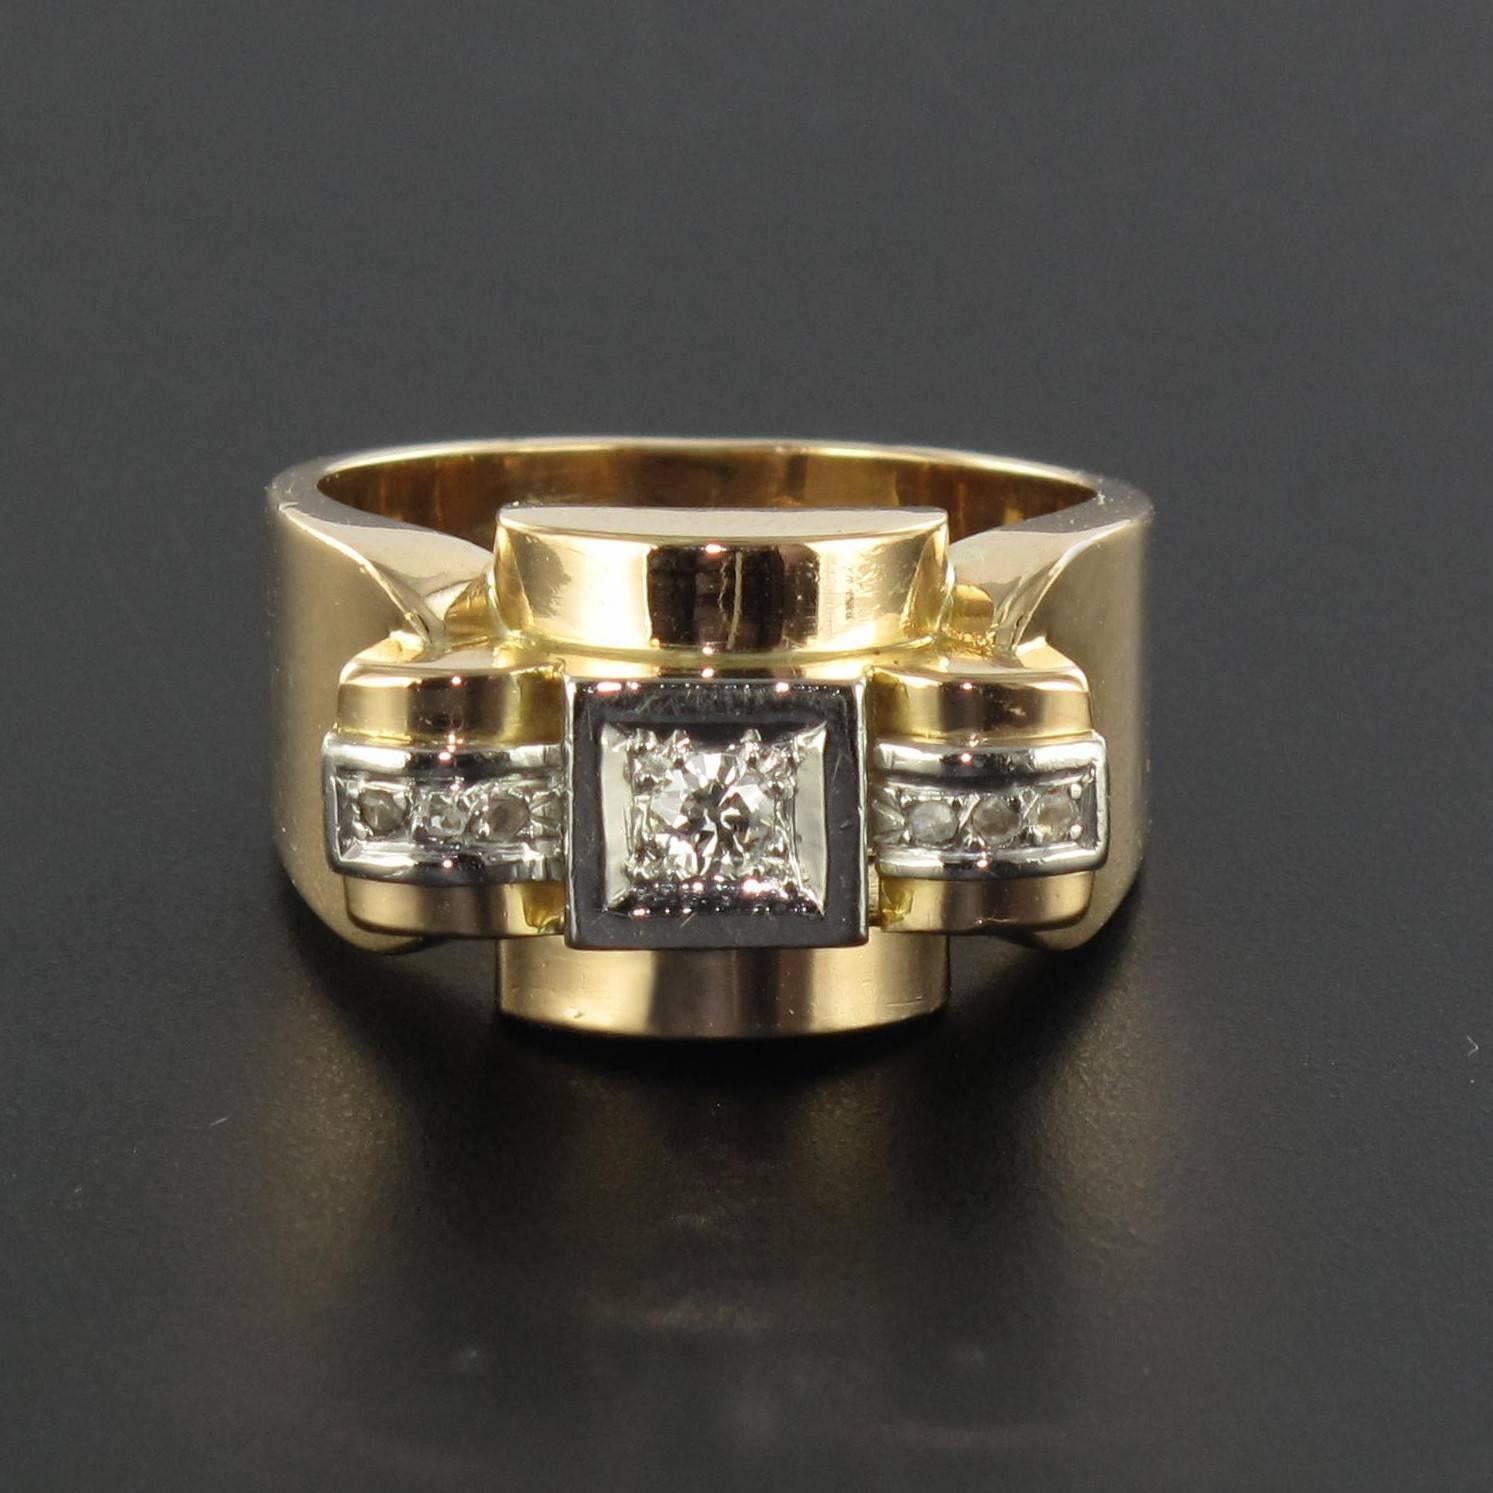 Ring in platinium and 18 carat yellow gold, dog and eagle heads hallmarks. 

This large ring from the 1940s boasts a geometric design set here and there with 3 small rose cut diamonds that surround an antique brilliant cut diamond set in a square